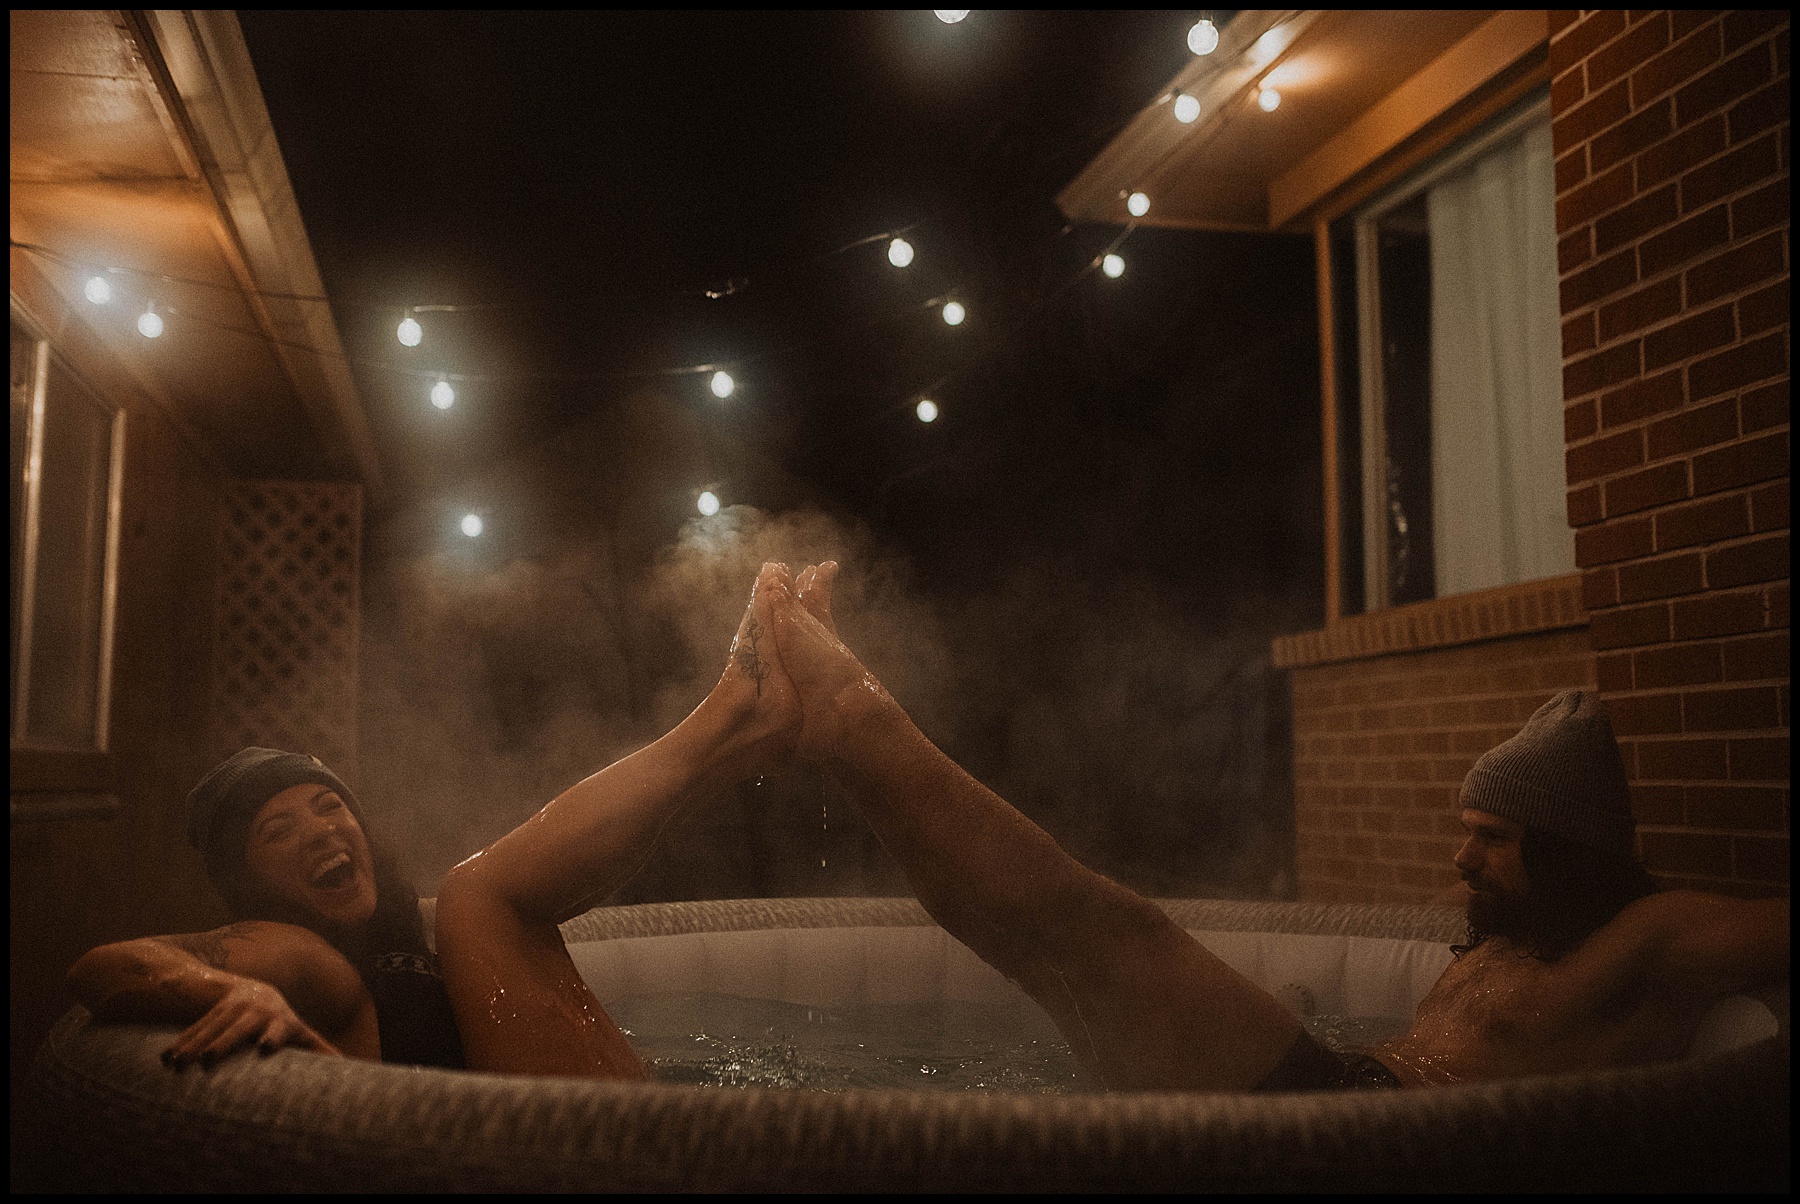 Colorado springs engagement session in a hot tub